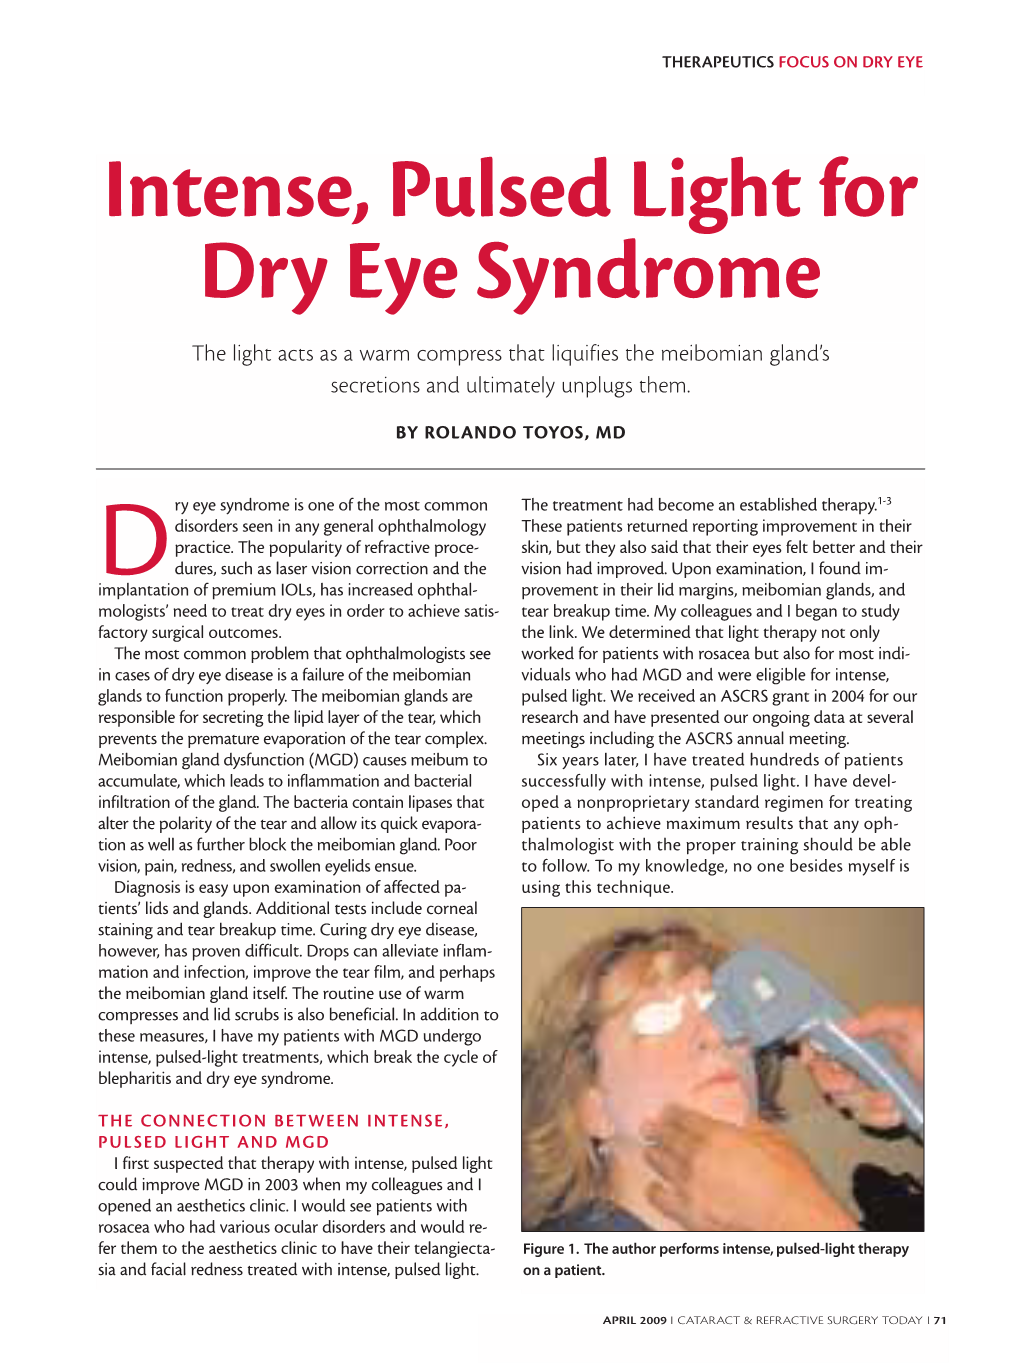 Intense, Pulsed Light for Dry Eye Syndrome